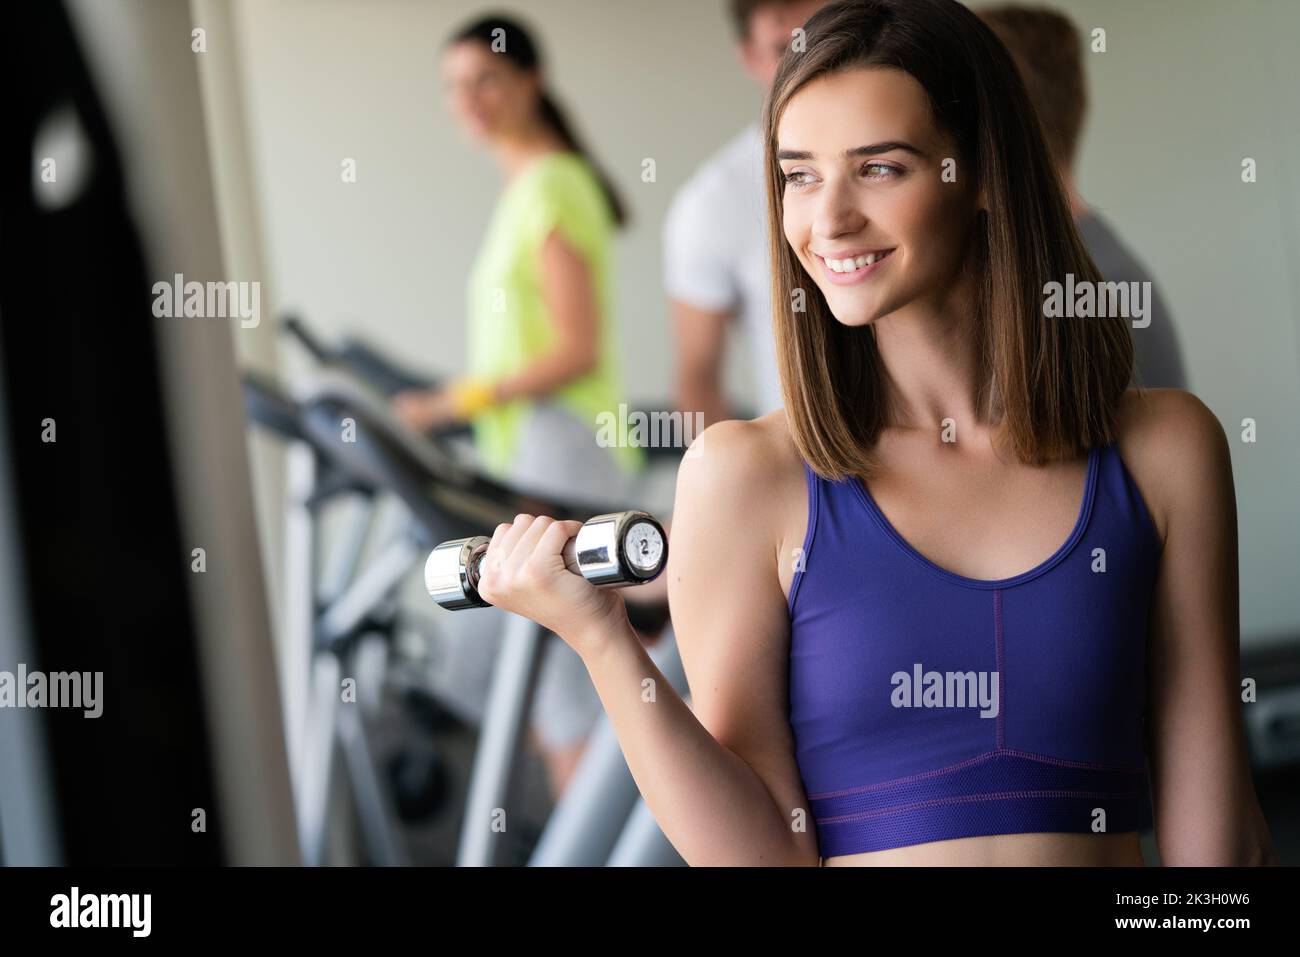 Attractive young woman working out with dumbbells at a gym. Stock Photo